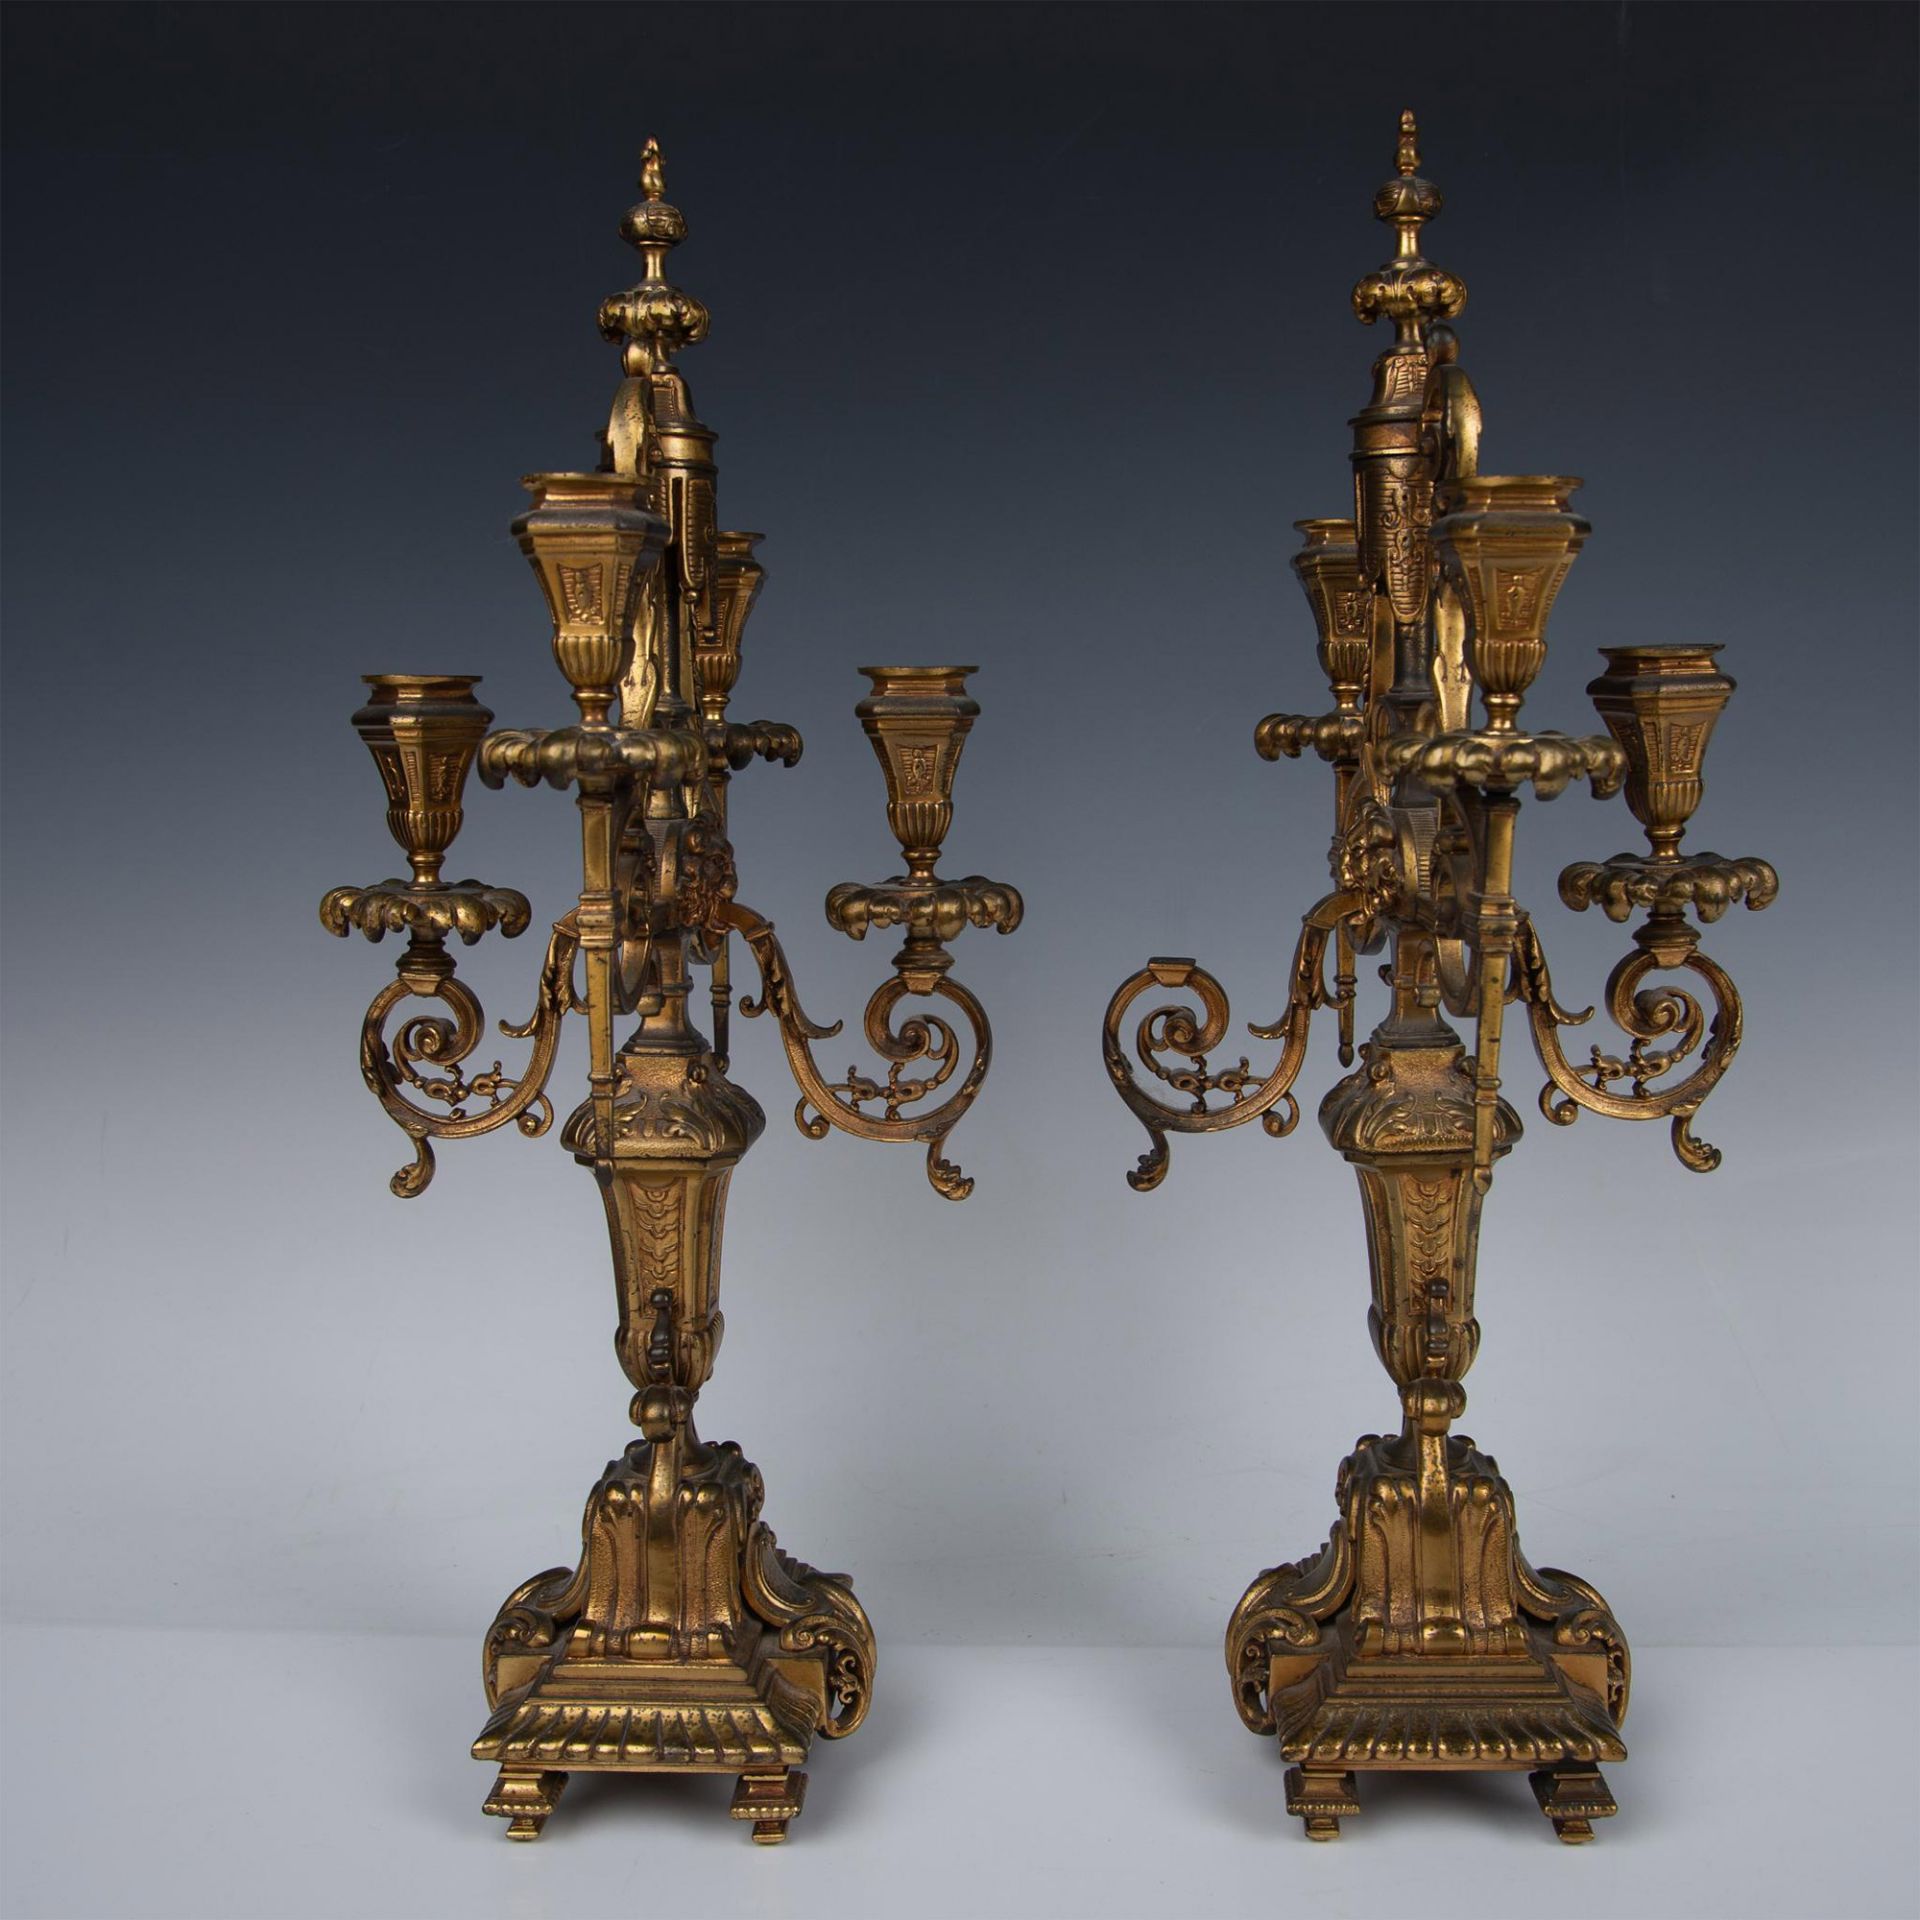 Pair of Brass Baroque Style Candelabras - Image 5 of 8